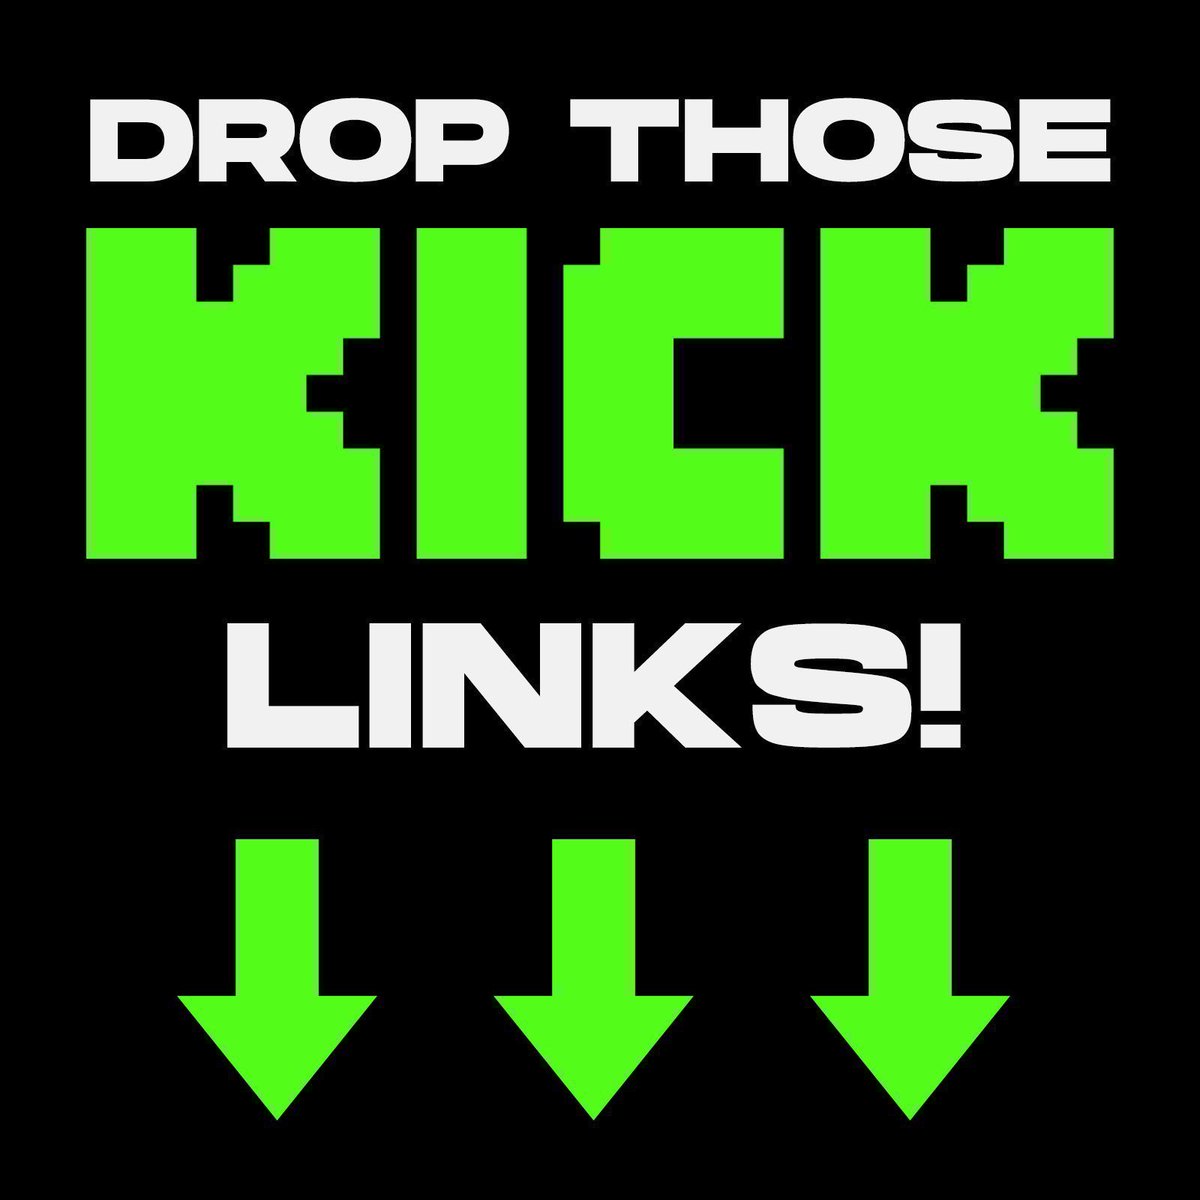 🚨 ATTENTION WHOS TRYING TO GET TO AFFLIATE AND BEYOND🚨 

Comment your Kick ✅ 

Follow each other ✅ 

Like and RT this tweet ✅ 

Follow us for Daily gains ✅

Follow kick.com/ramrodjenkins 💚

Check each other out ✅

#KickStreamer #KickStreaming #Kick #KickArmy